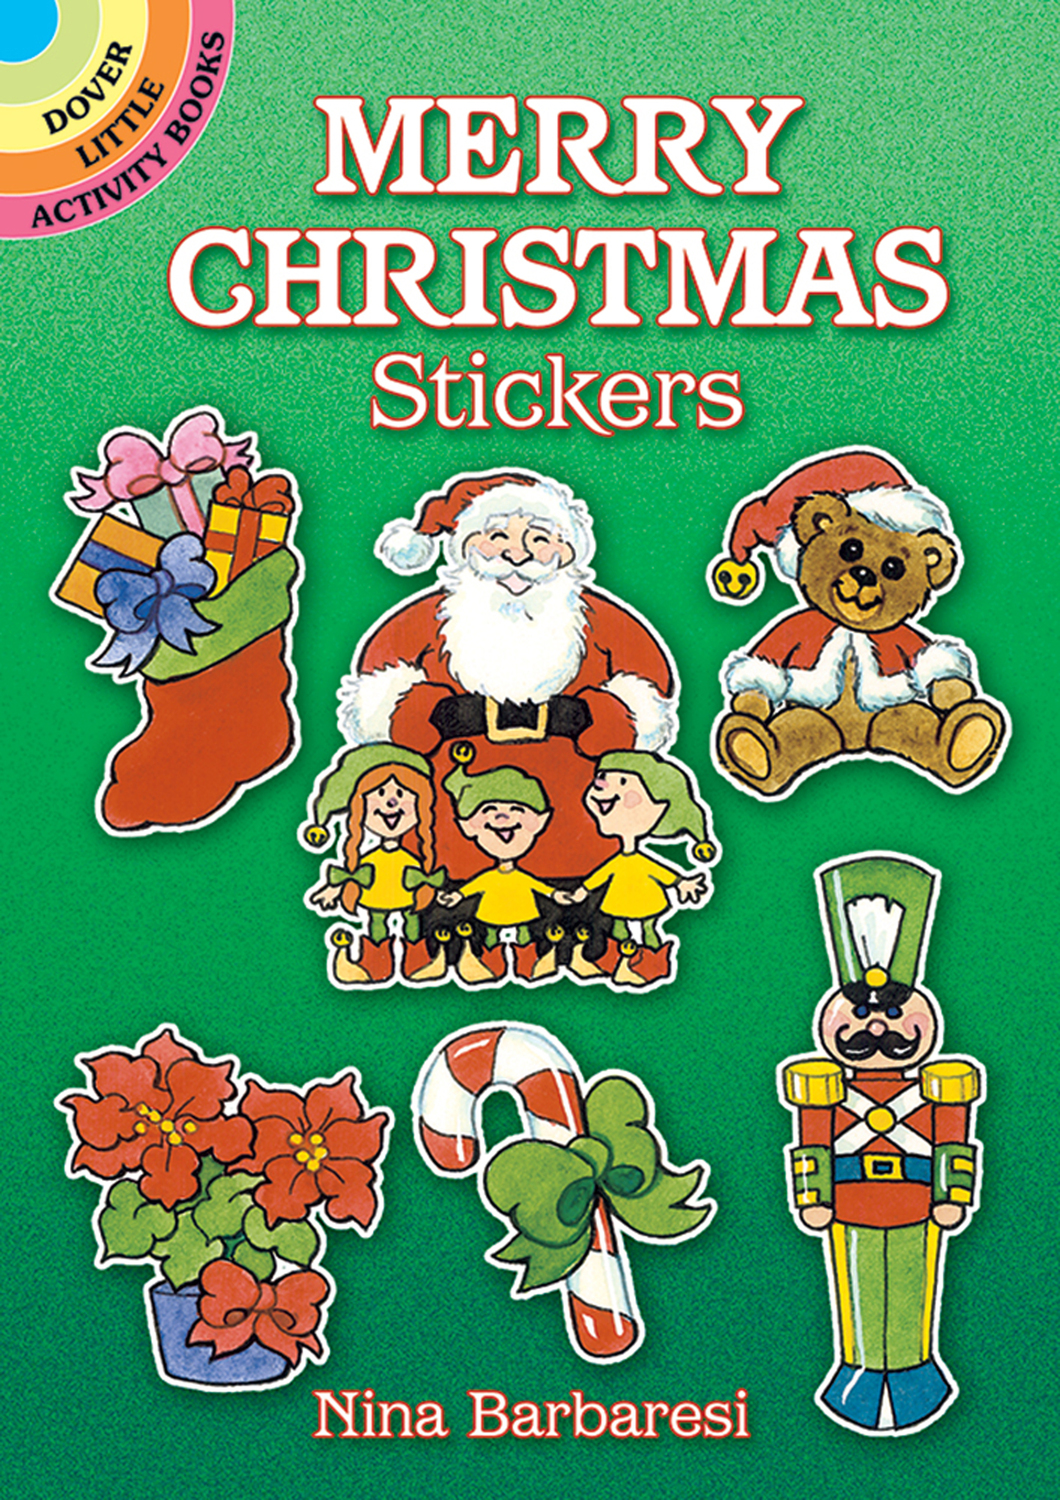 Merry Christmas Stickers - Dover